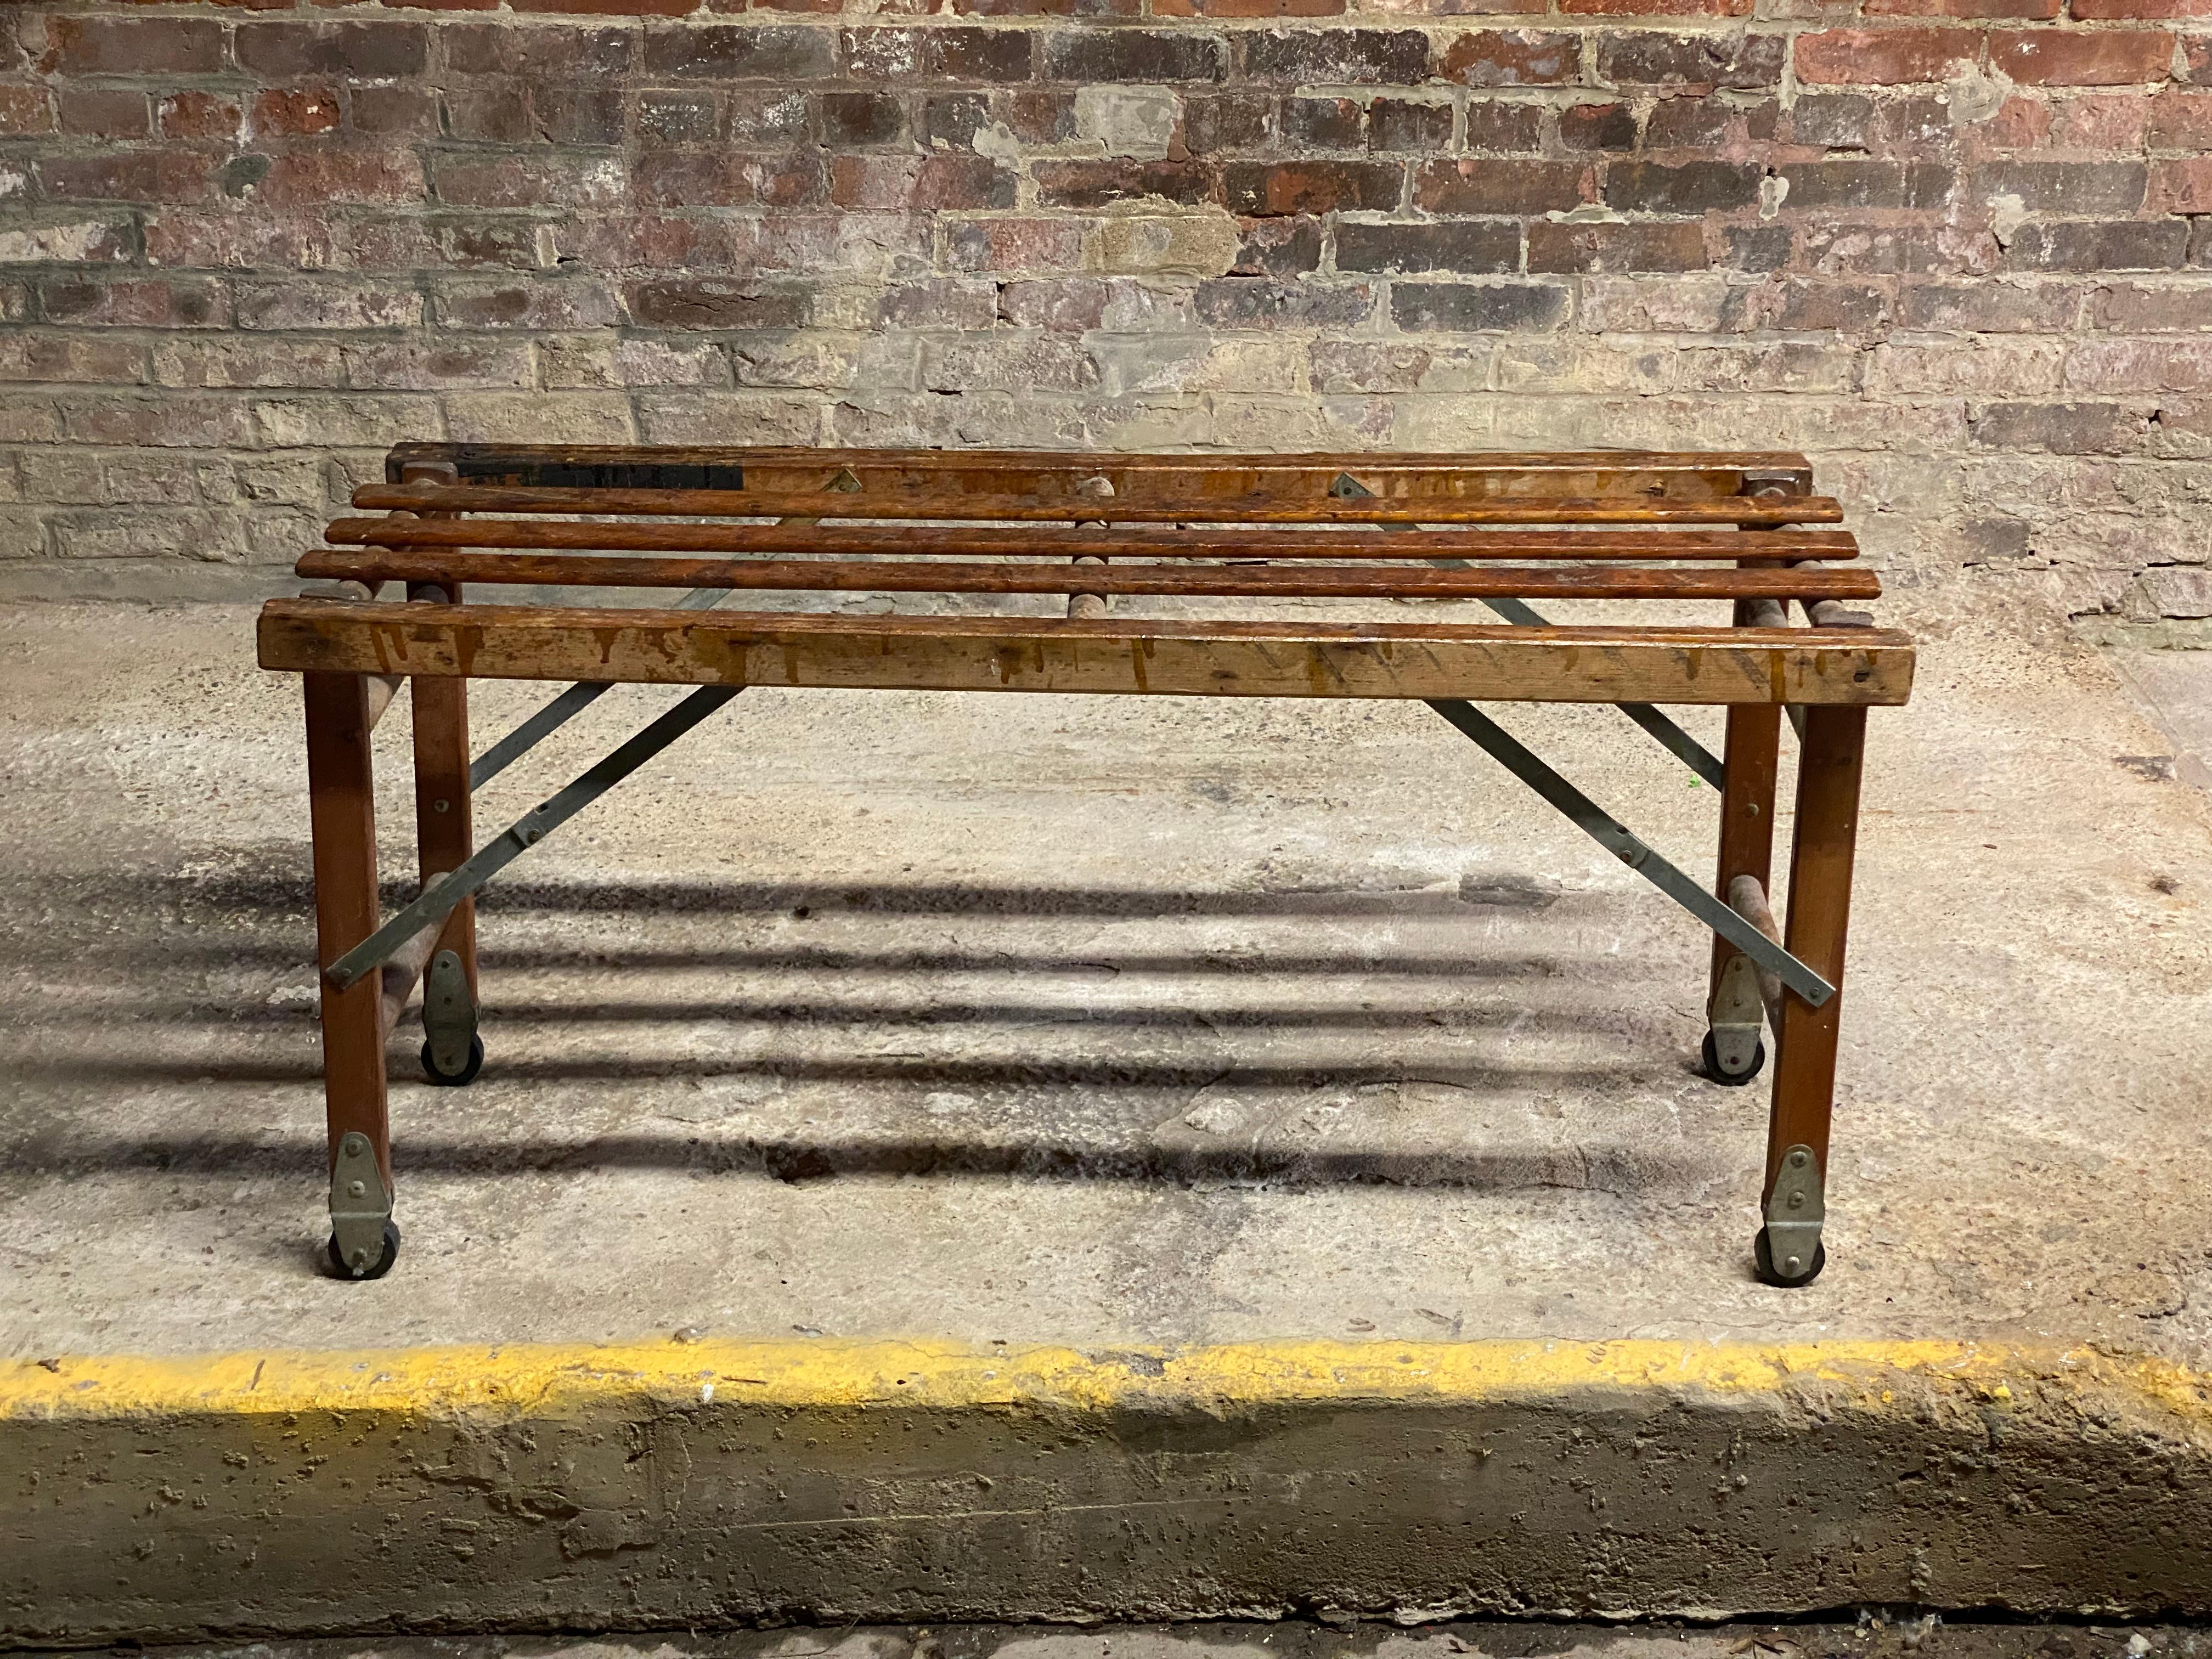 Vintage factory or work sight folding and rolling slatted stand much like the vintage folding wallpaper tables I've seen and owned before, but significantly smaller. Circa 1930. Folds up flat, hard rubber wheels and would work anywhere in the